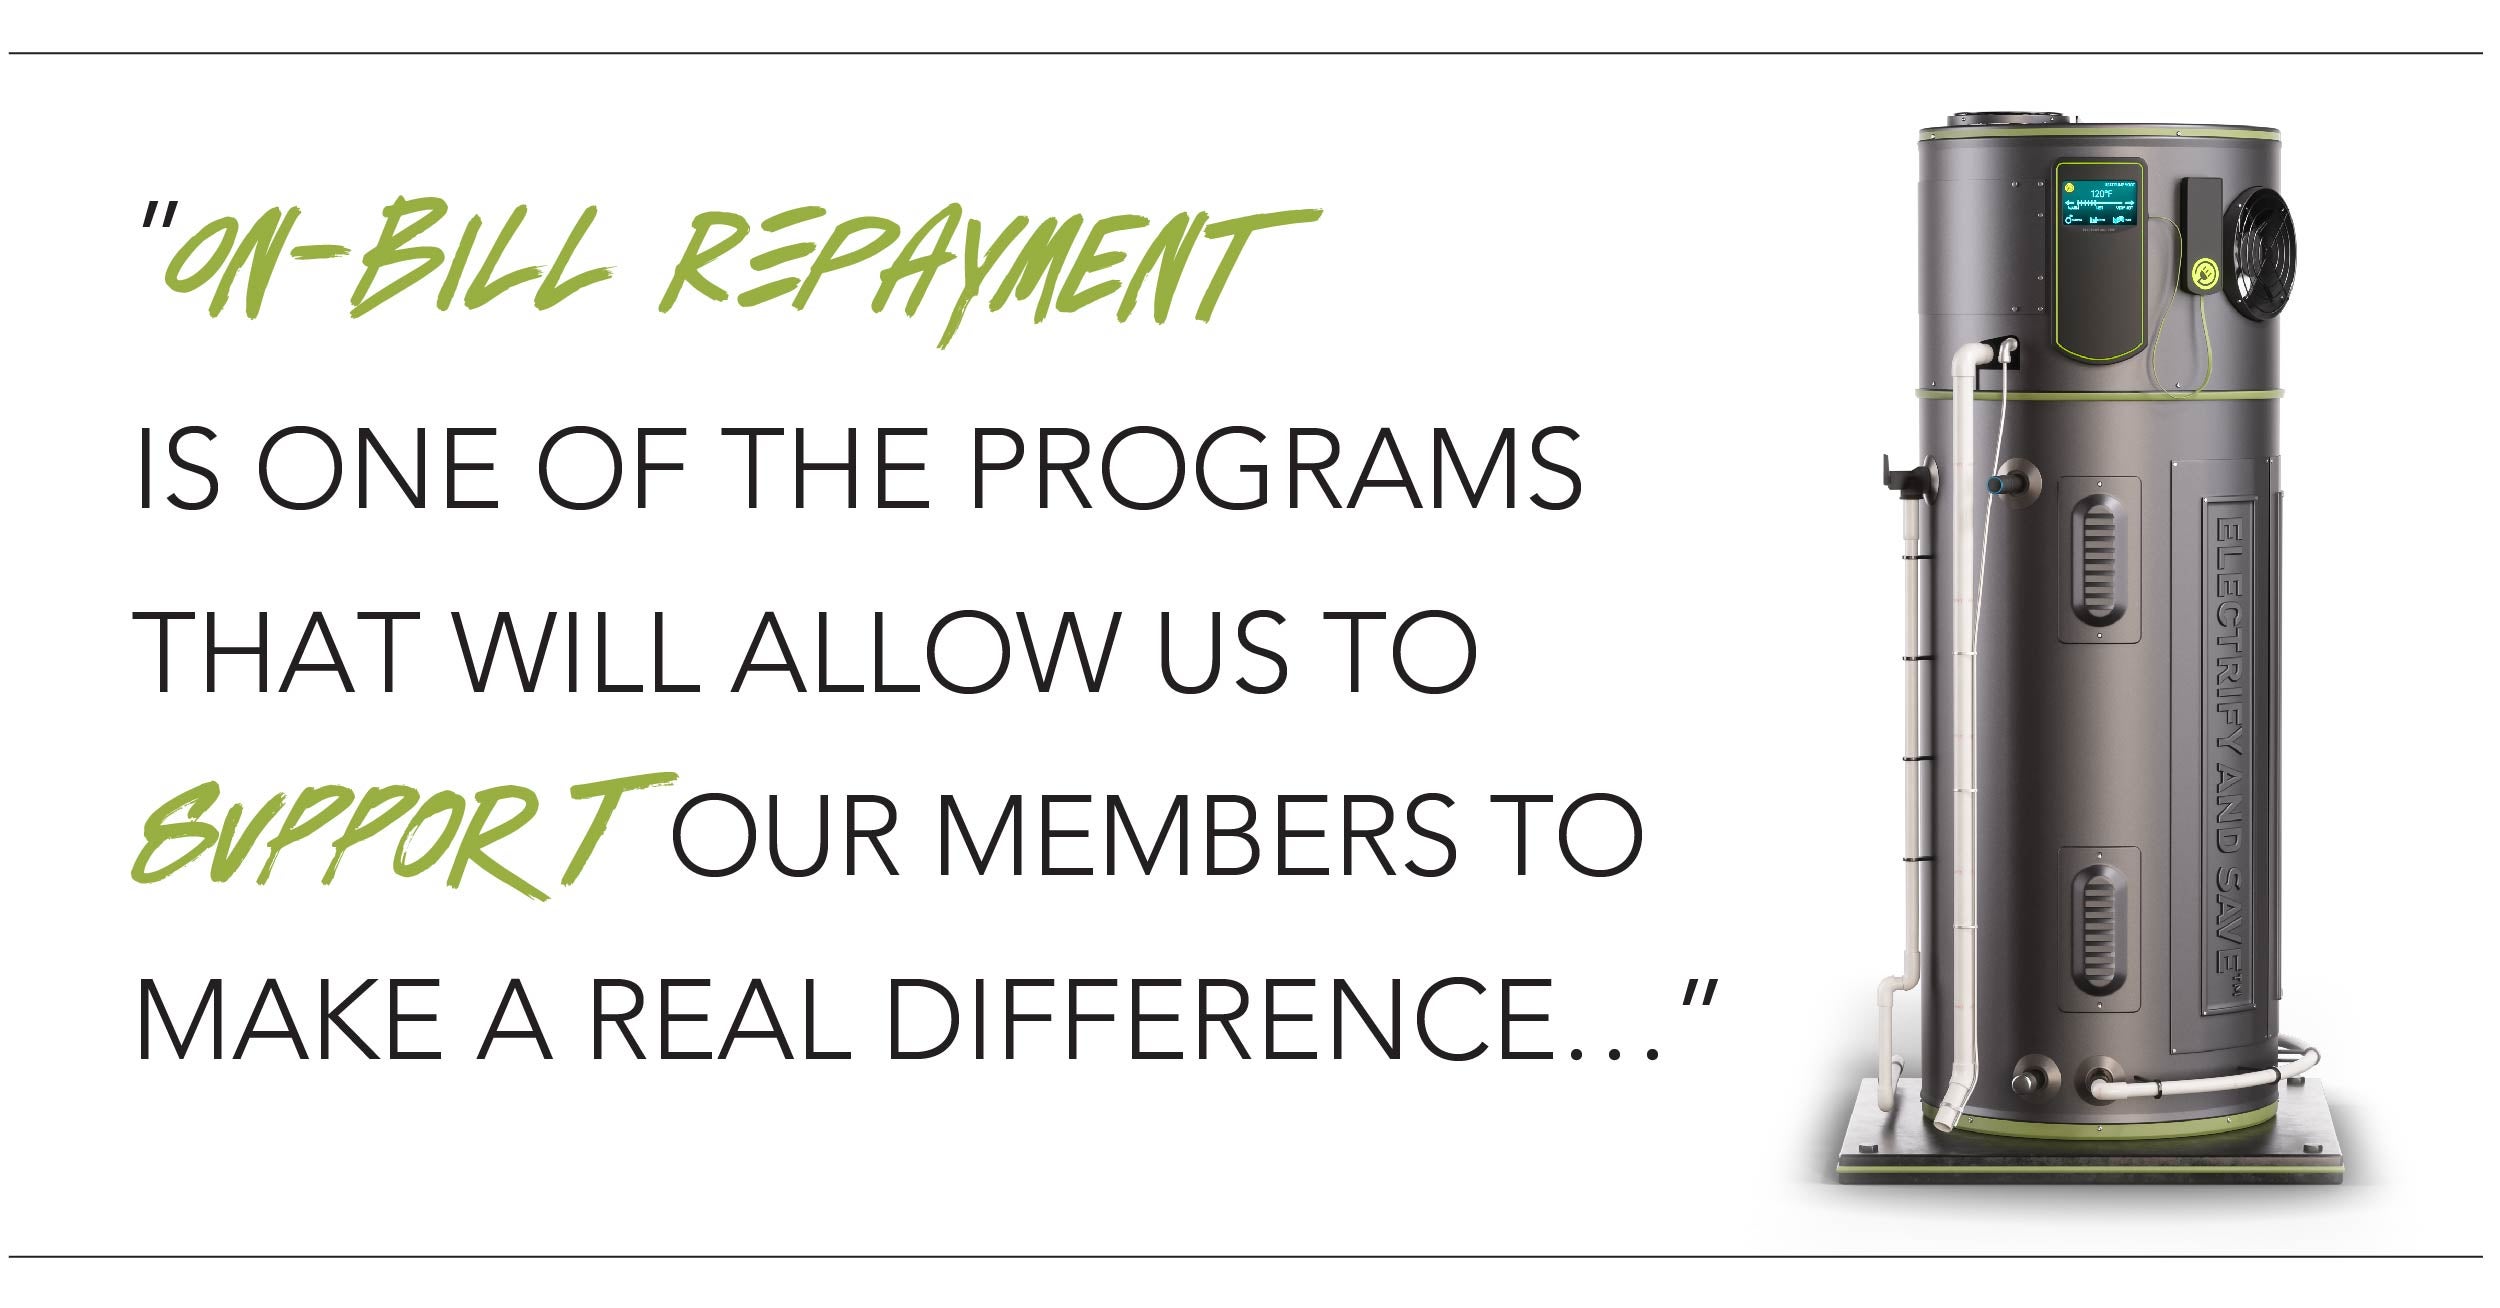 On-bill repayment is one of the programs that will allow us to support our members to make a real difference for consumers and businesses.